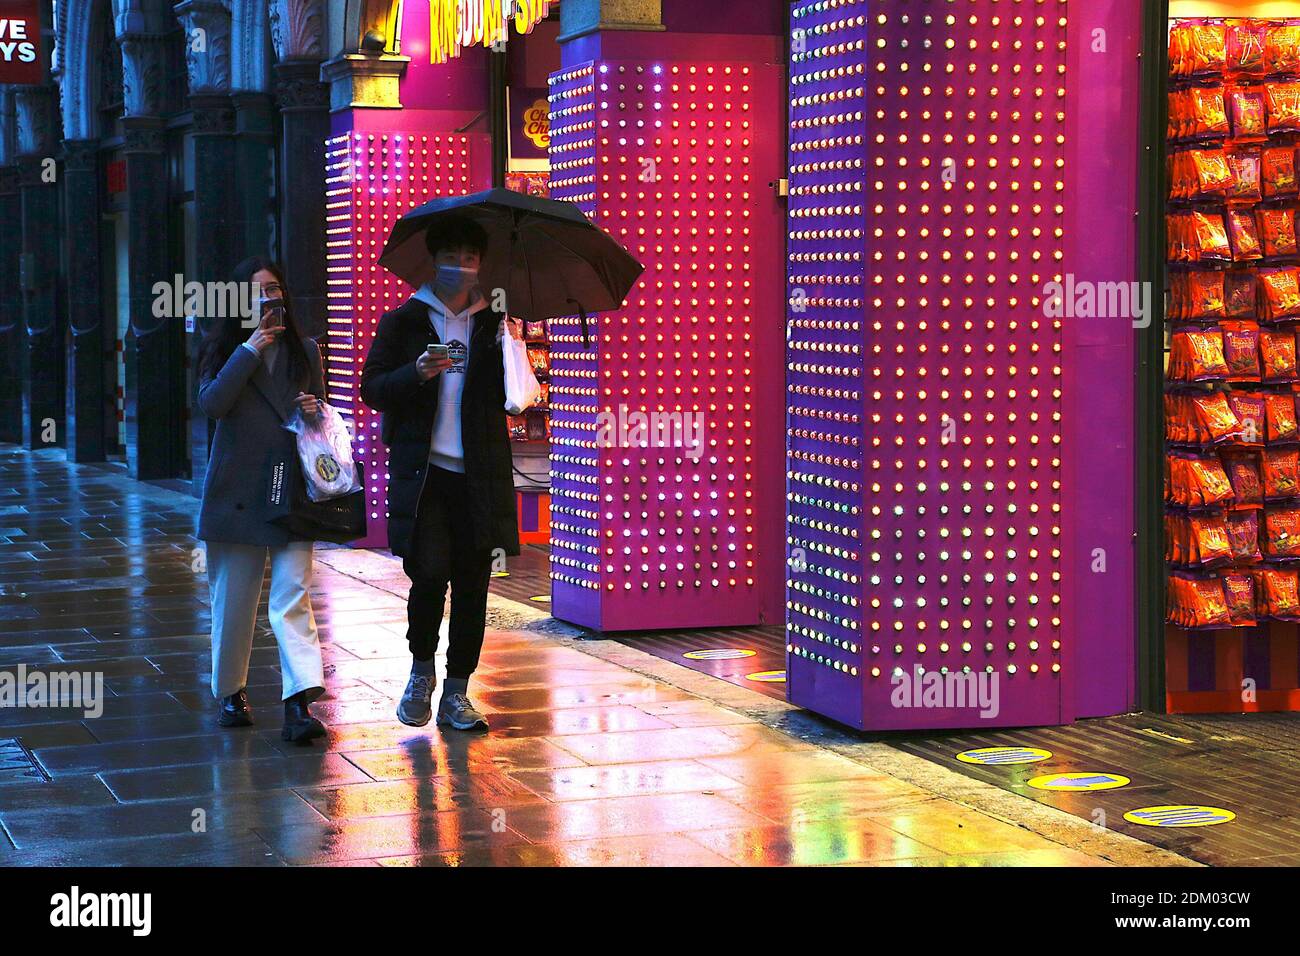 Westminster, London, UK. 16 Dec, 2020. UK Weather: Chilly and drizzly rain  in the West End in London. People walking around with umbrellas. Photo  Credit: PAL Media/Alamy Live News Stock Photo - Alamy